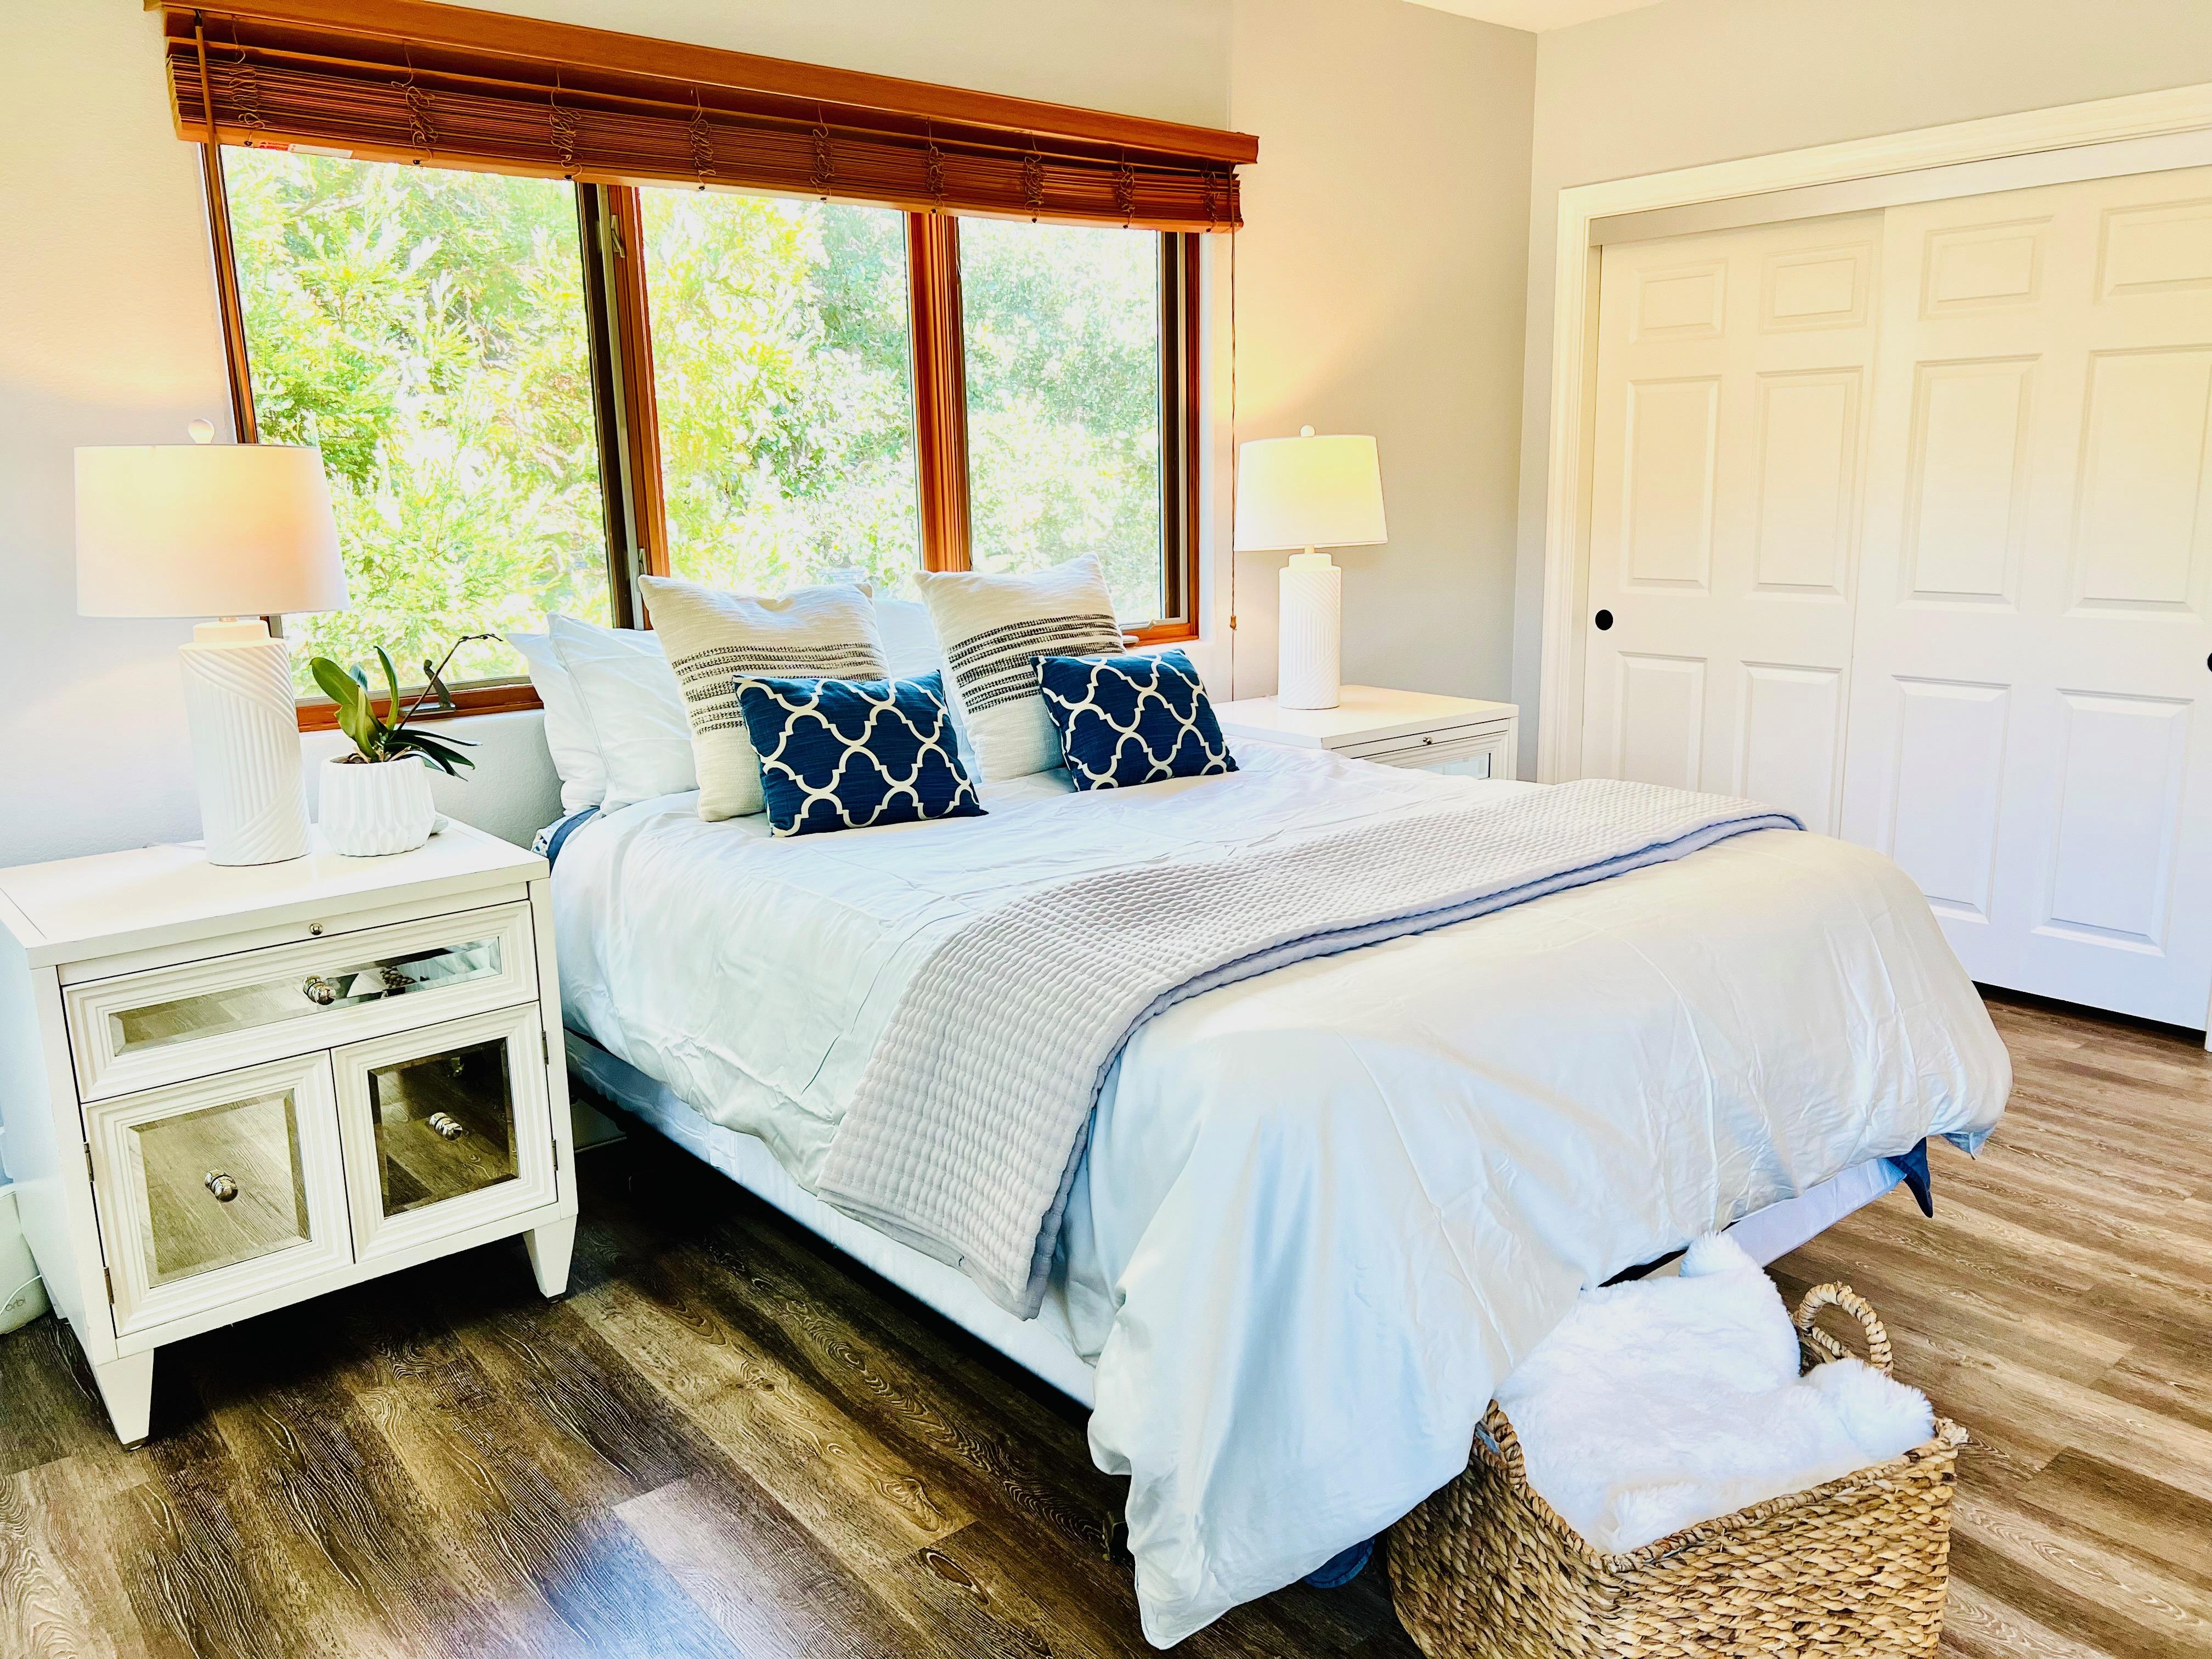 The master suite features a queen bed, his and hers closets, and a connected bathroom with double sinks, tub, and shower. 